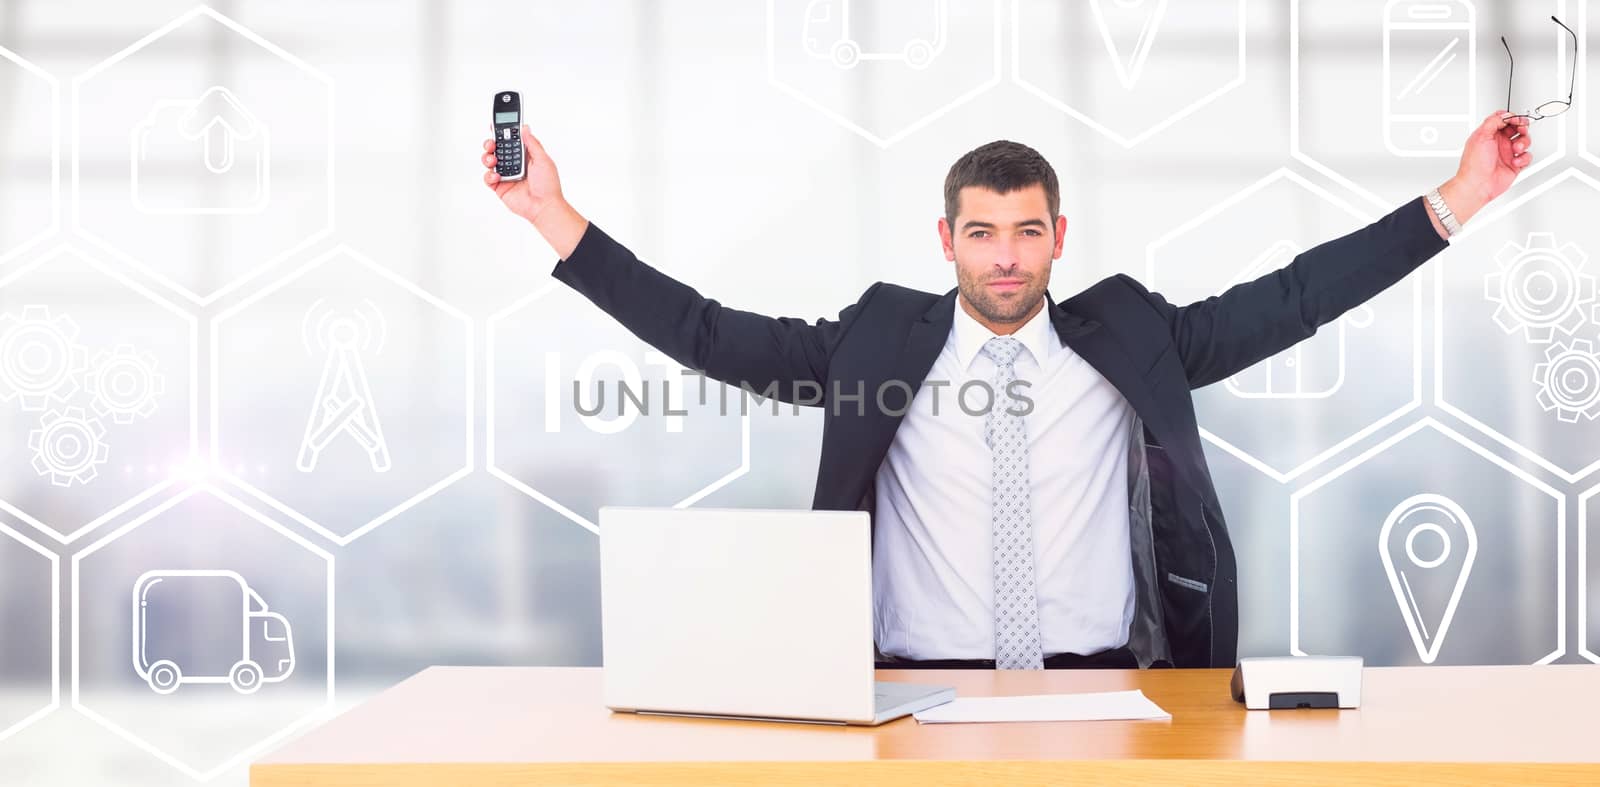 Businessman holding phone and glasses  against modern room overlooking city